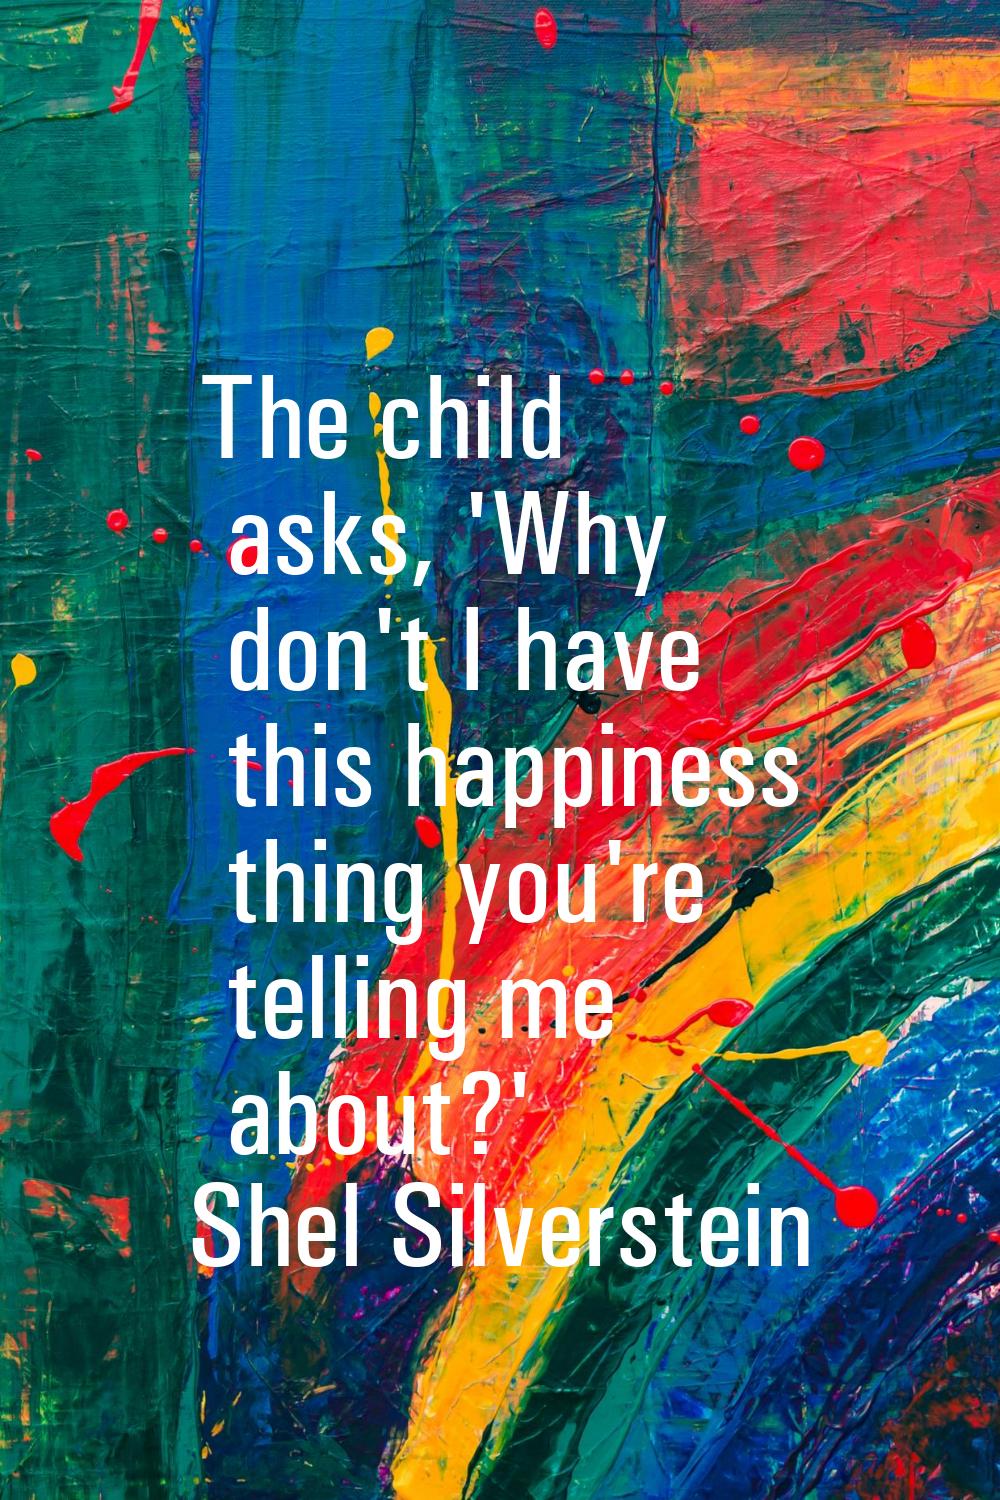 The child asks, 'Why don't I have this happiness thing you're telling me about?'